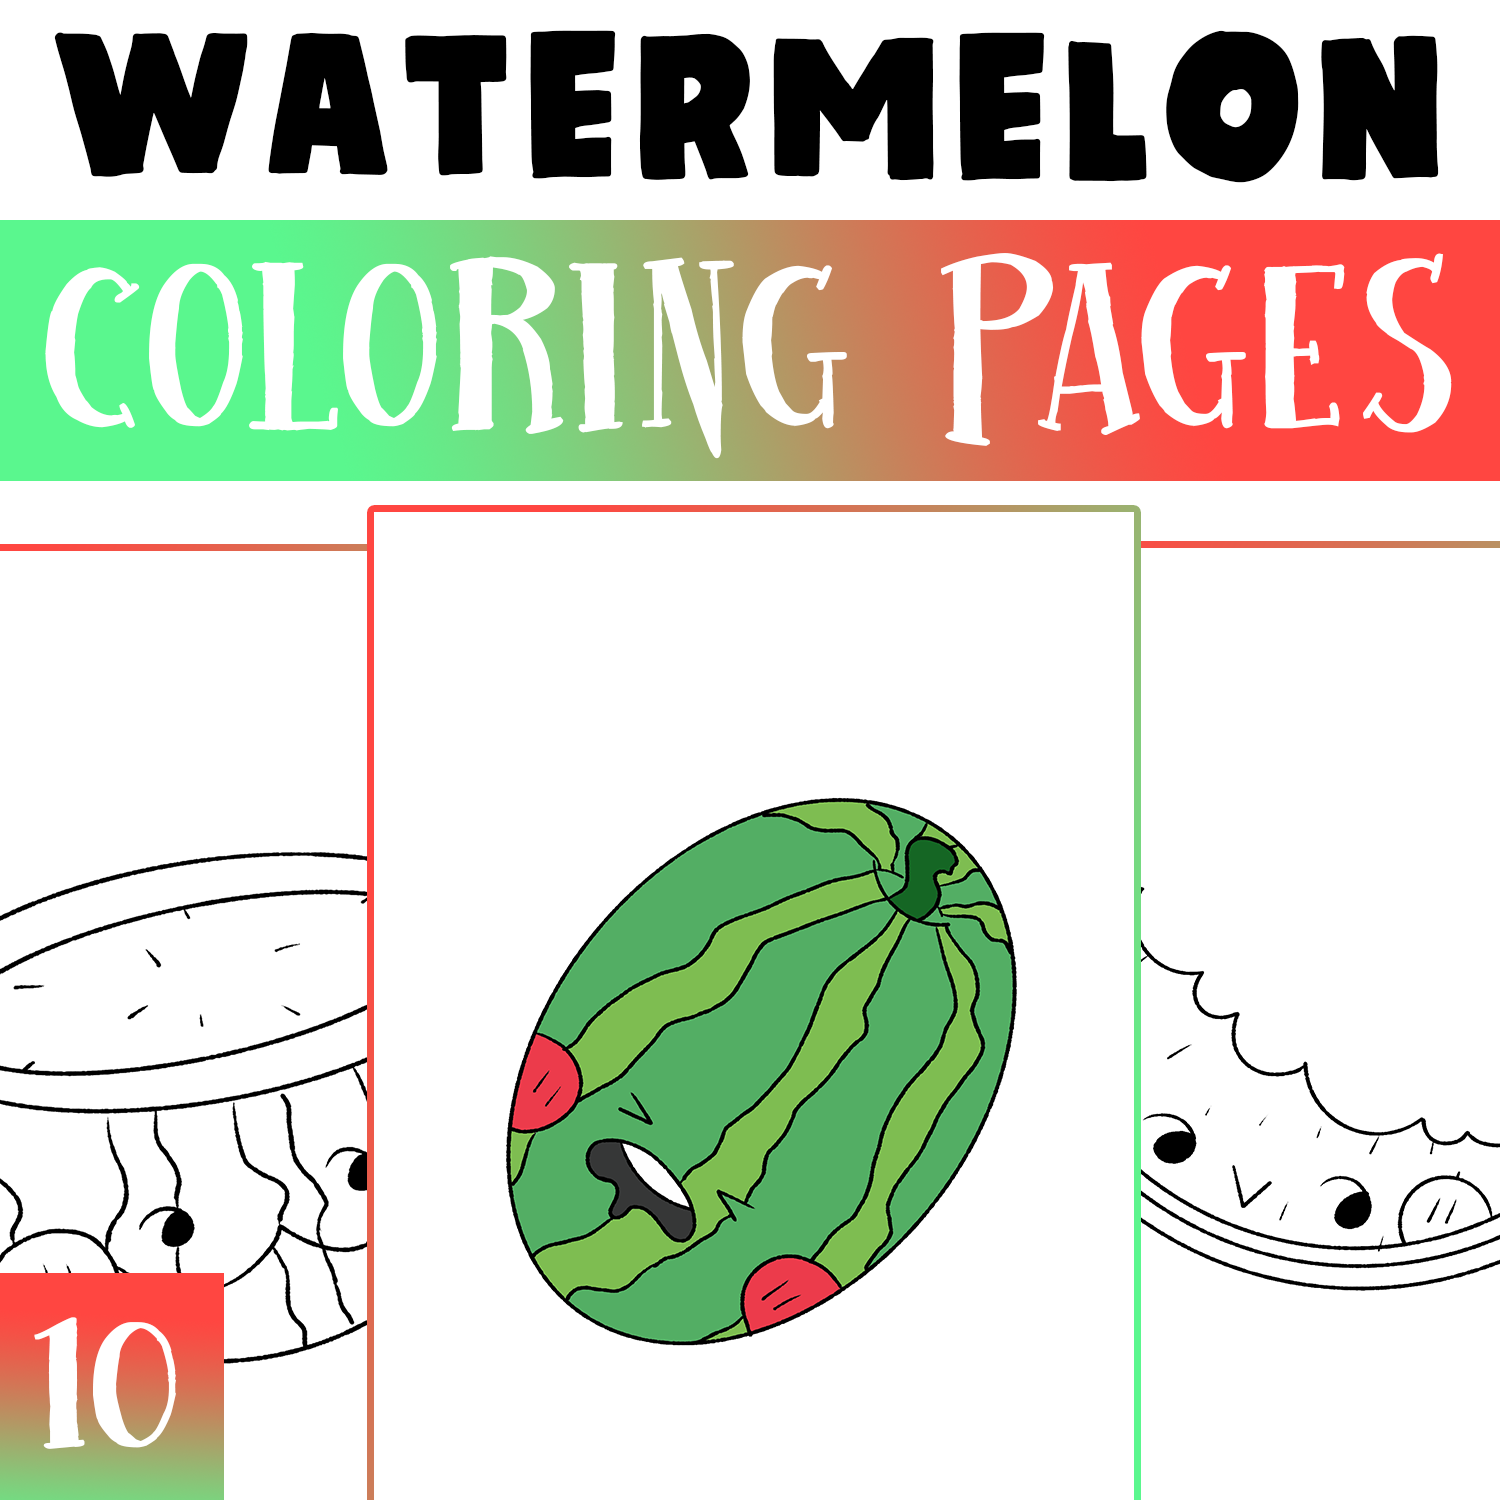 Watermelon coloring pages worksheet activities end of the year activity made by teachers